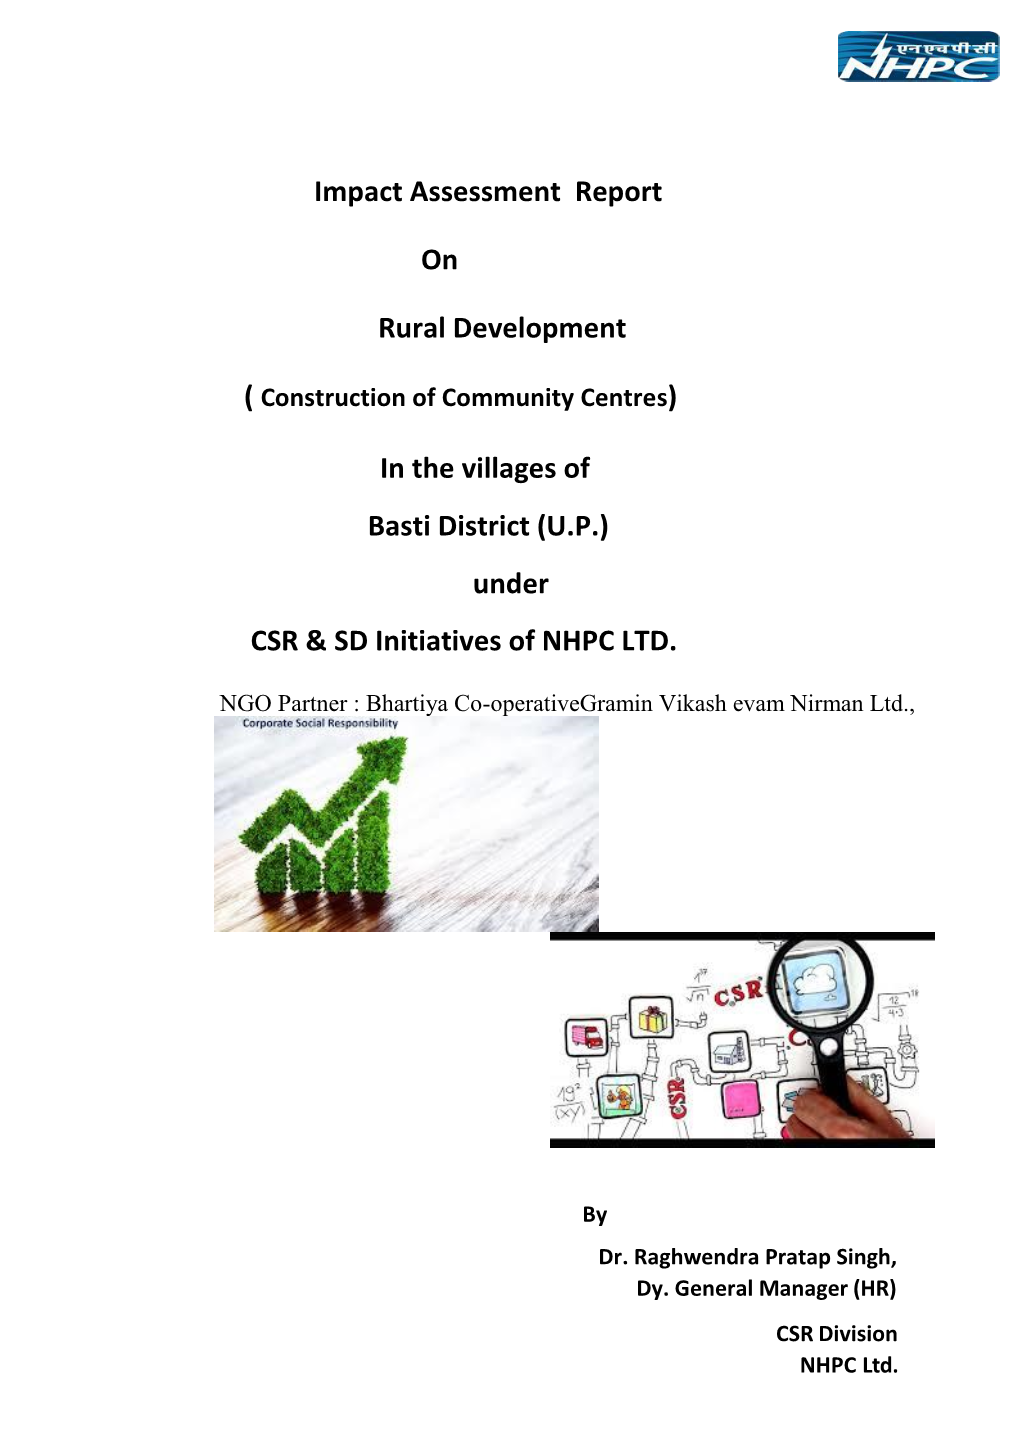 Impact Assessment Report on Rural Development in The